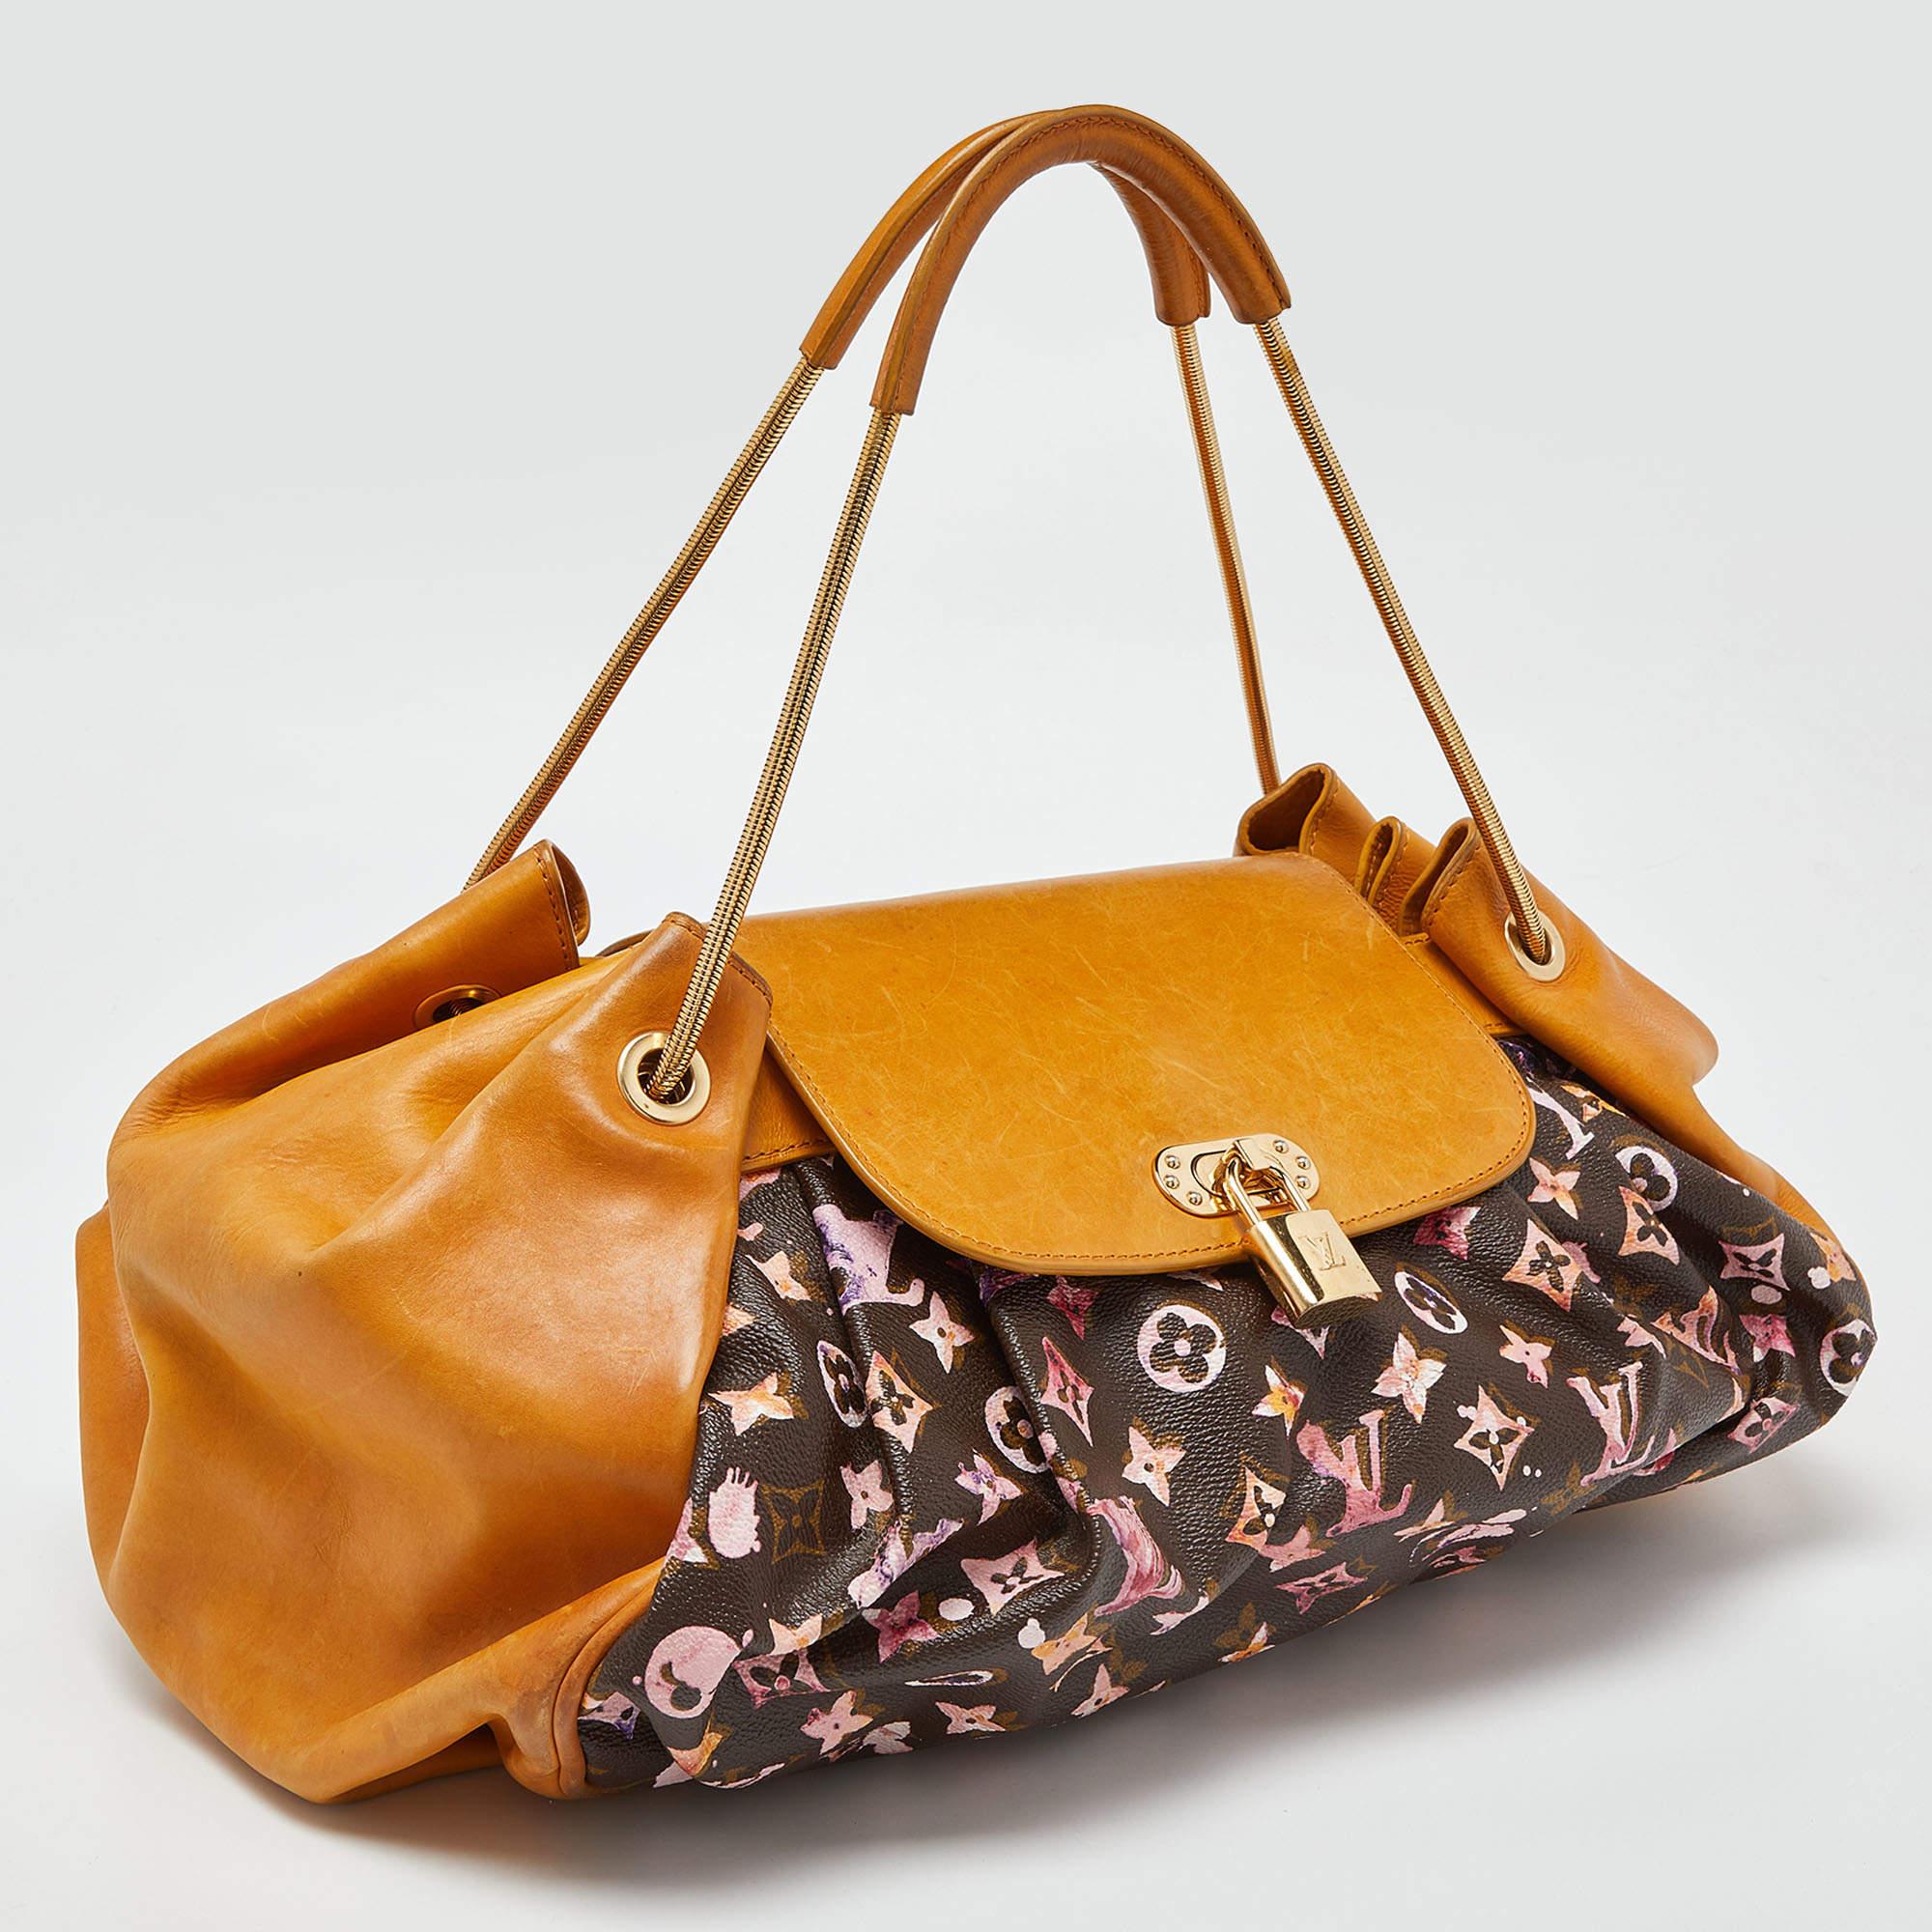 For their Spring/Summer 2008 line, Louis Vuitton collaborated with Richard Prince. The Monogram Watercolor, inspired by Prince's paintings, comes alive in 17 different colors on this Jamais bag. It has a Monogram coated canvas & leather exterior, an